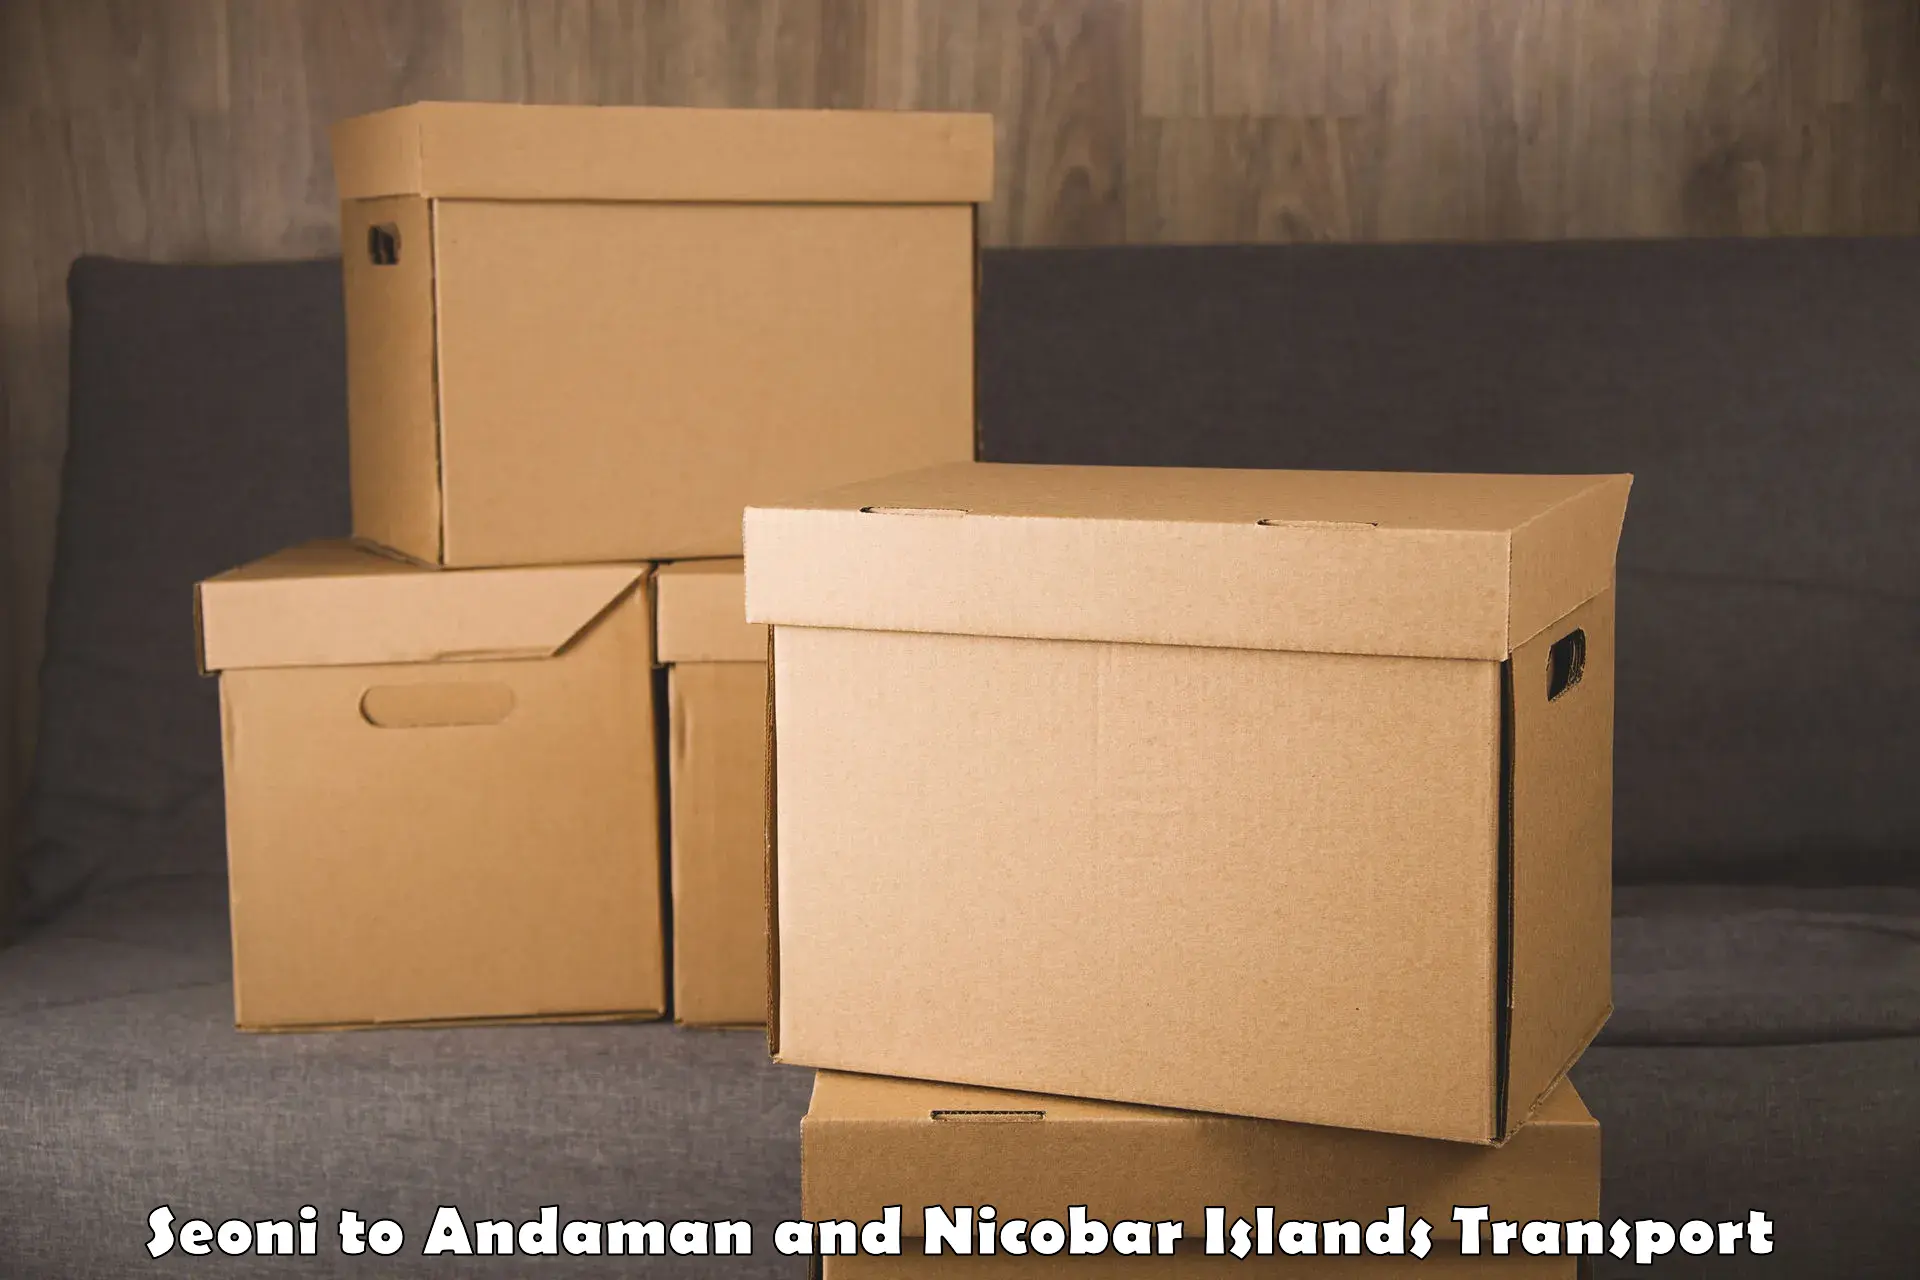 Express transport services in Seoni to Andaman and Nicobar Islands